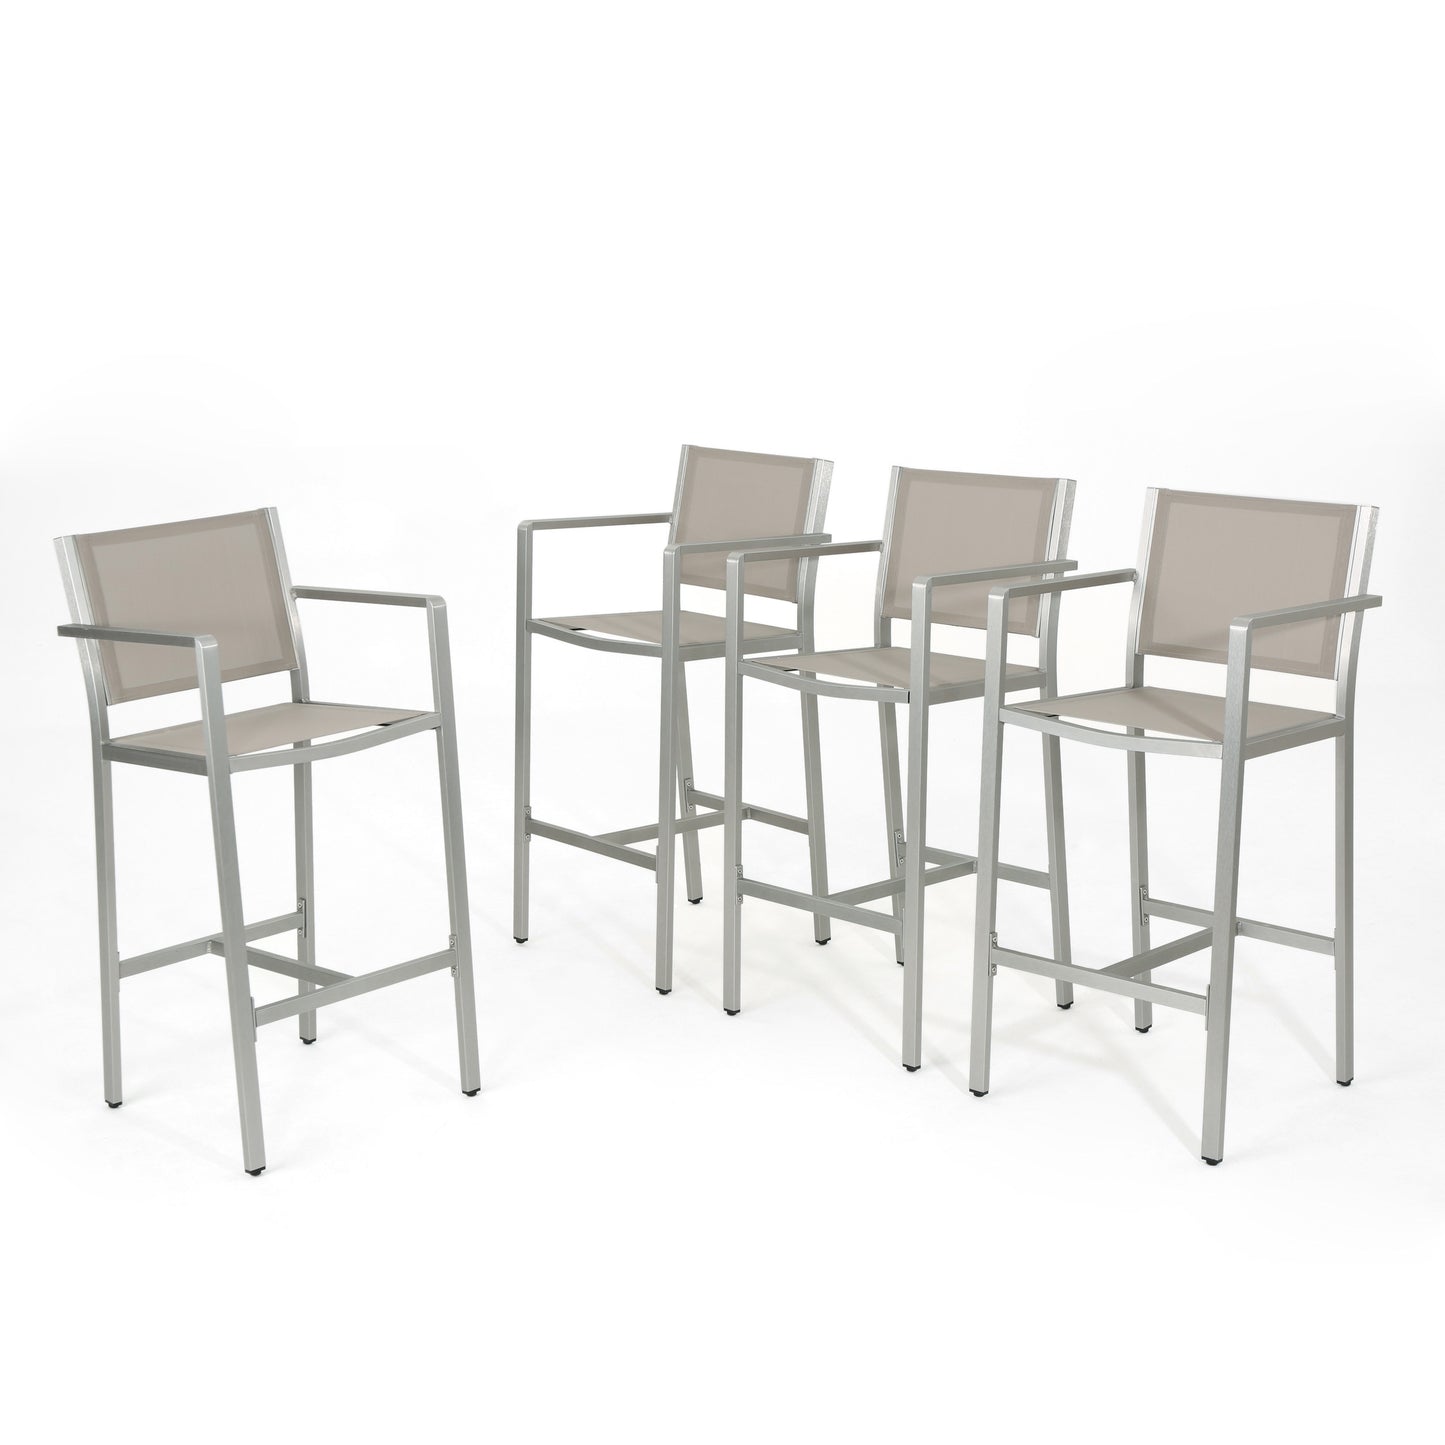 Tammy Coral Outdoor Mesh 29.50 Inch Barstools with Rust-Proof Aluminum Frame